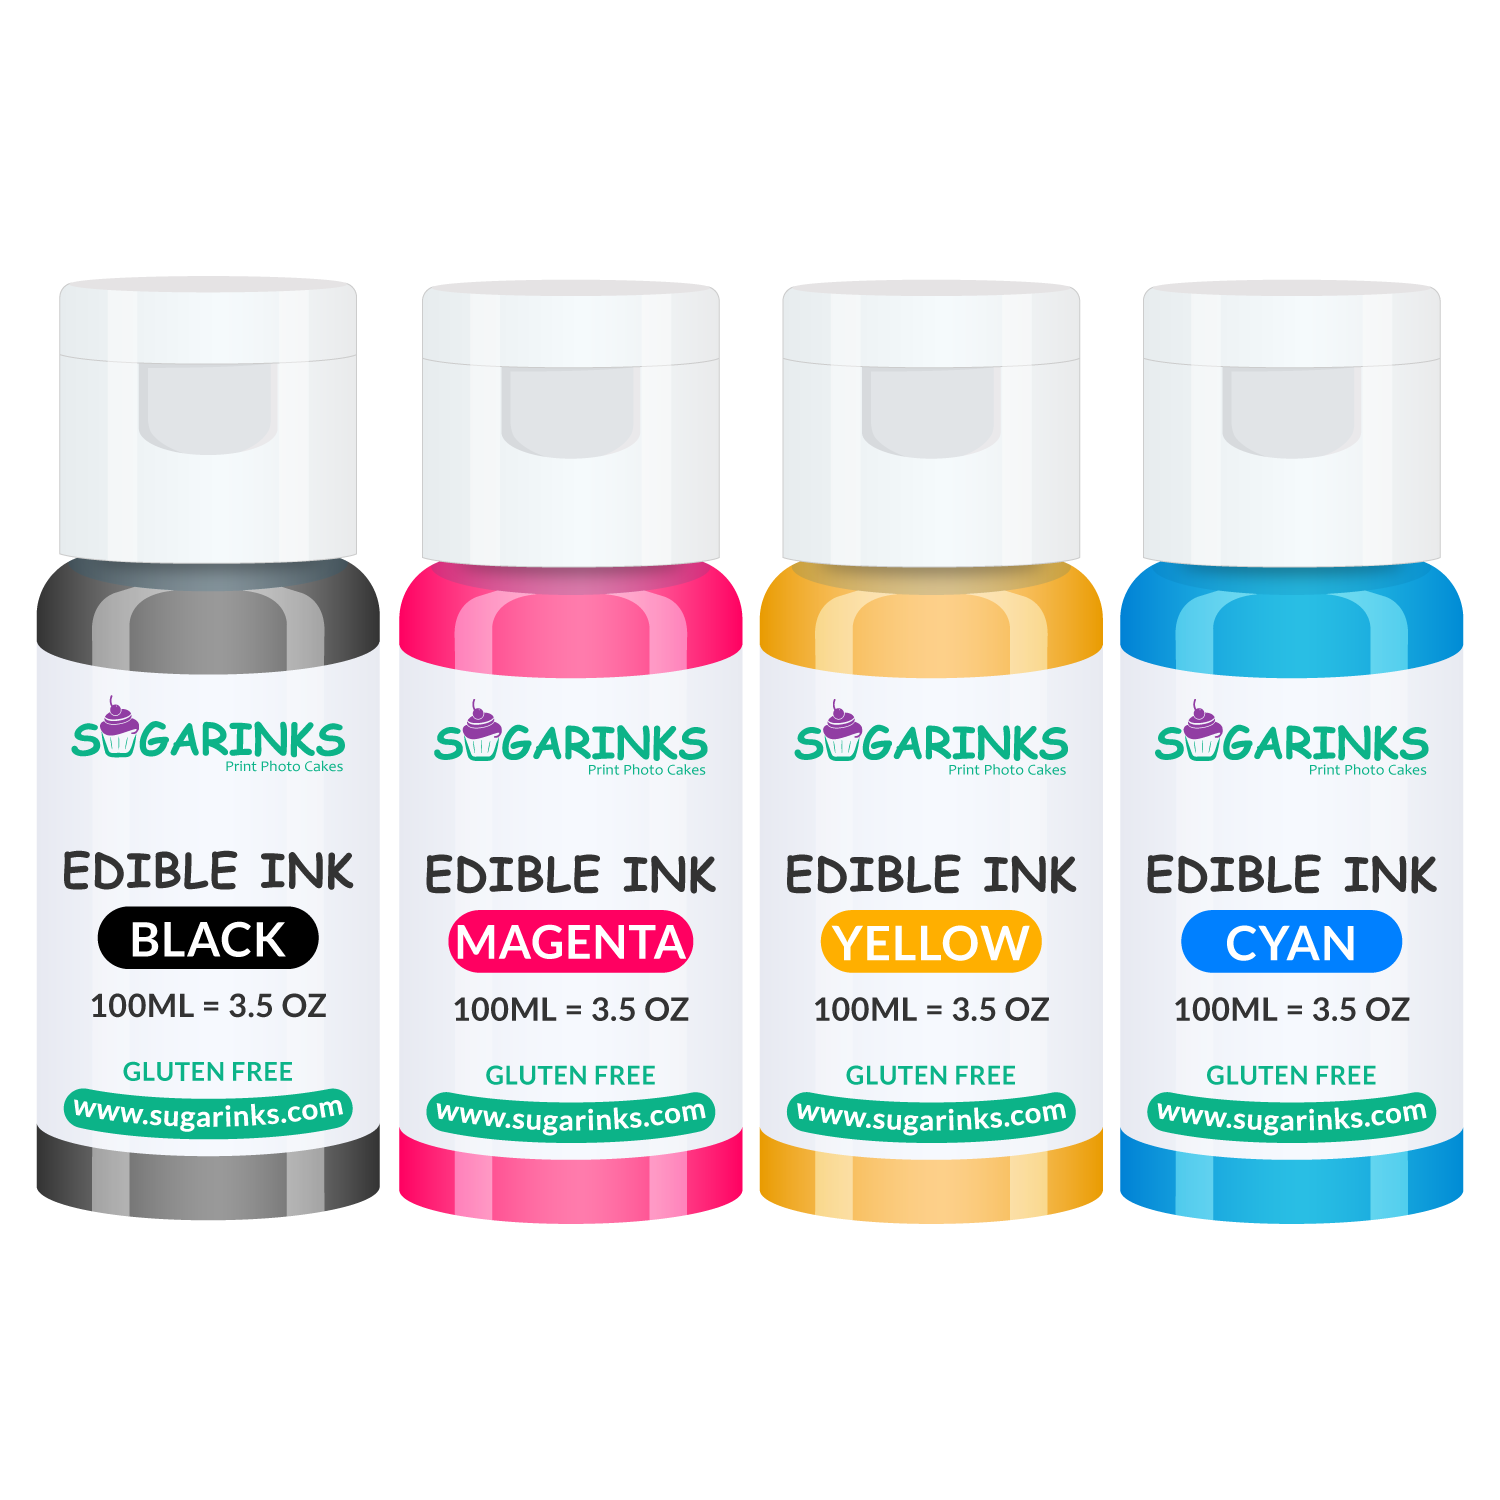 Sugarinks Edible Ink Refill Pack for Canon Edible Printers (100ml/3.5Oz Each) – Black, Cyan, Magenta, and Yellow 